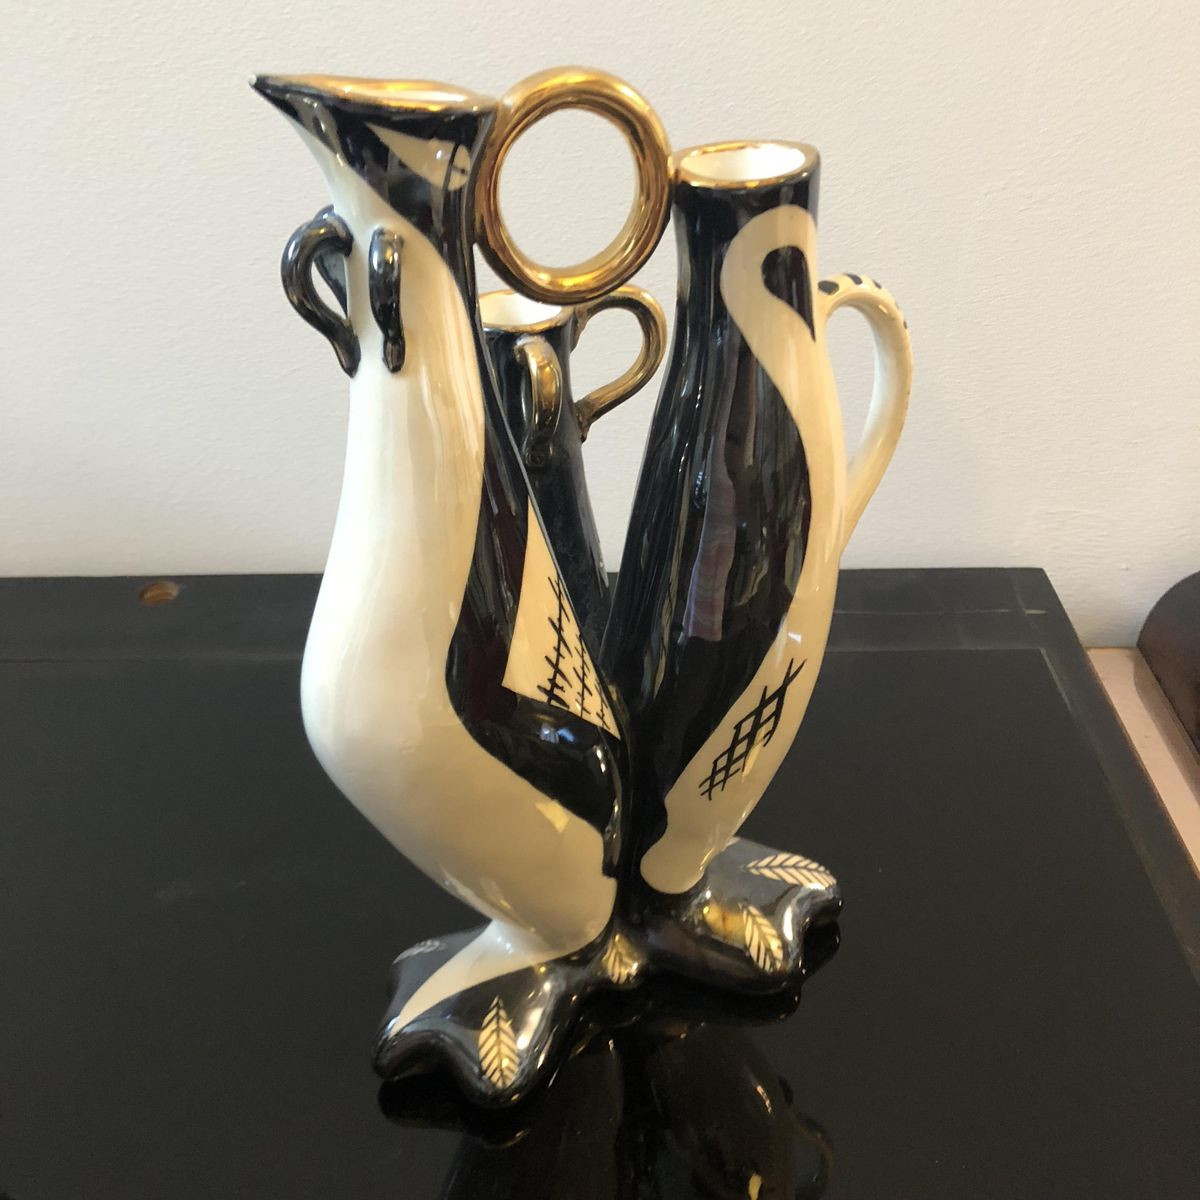 art nouveau vases for sale of italian black and white ceramic vases by g girardi 1950s set of 2 with price per set